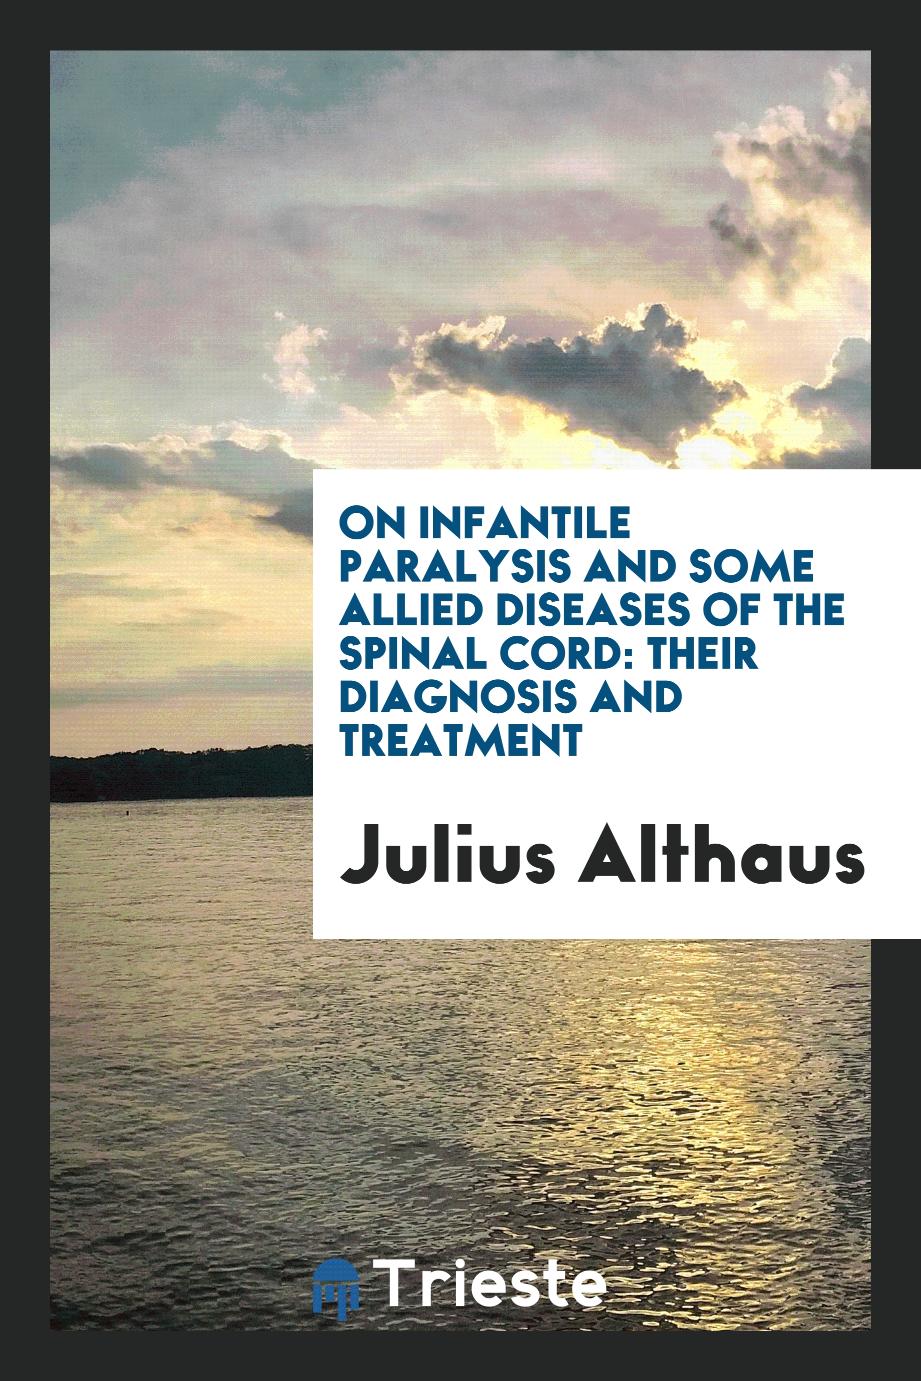 On infantile paralysis and some allied diseases of the spinal cord: Their diagnosis and treatment